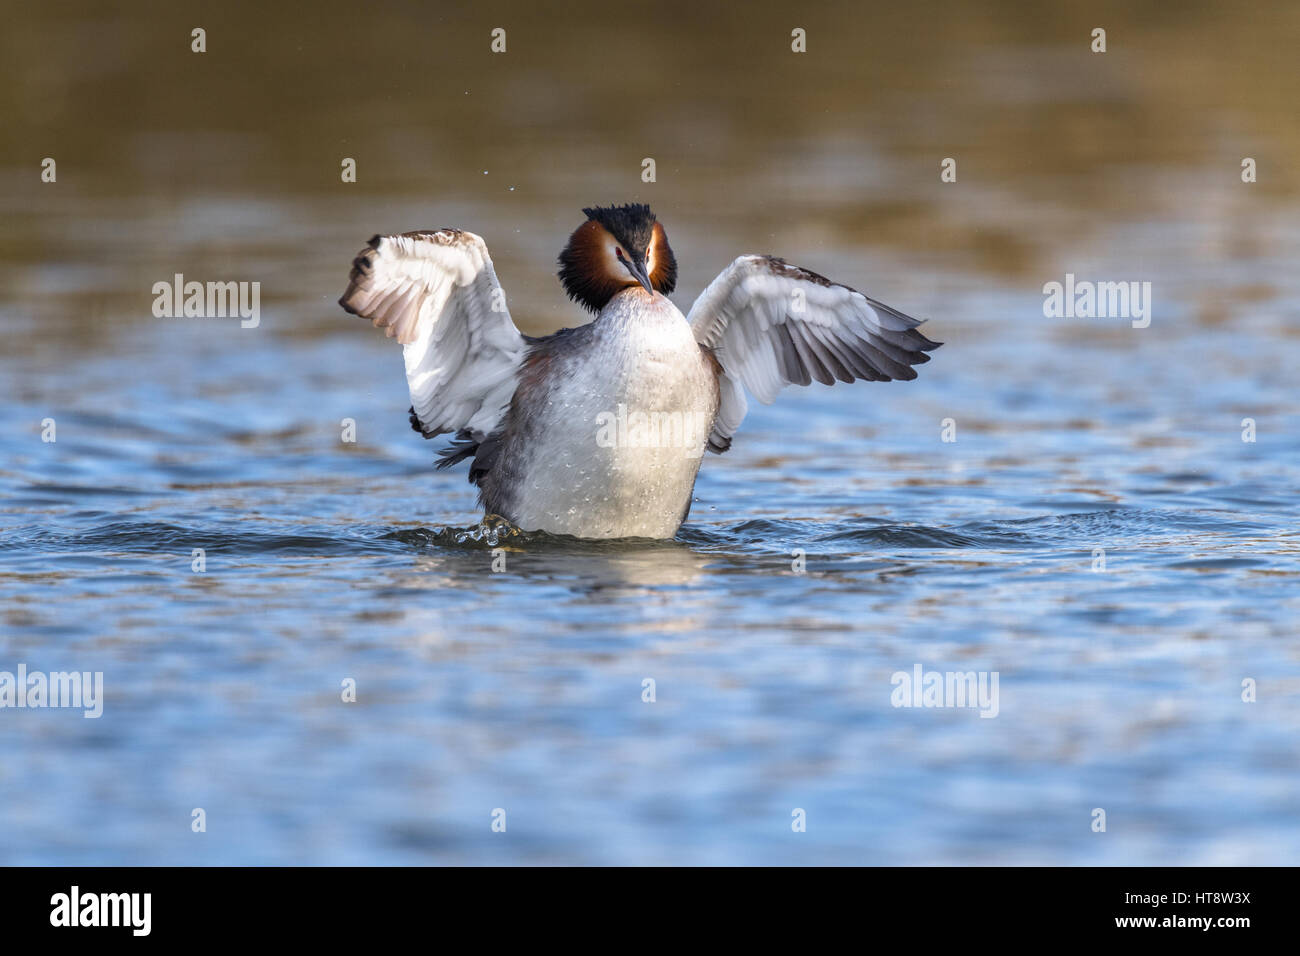 Adult Great Crested Grebe courtship routine Stock Photo